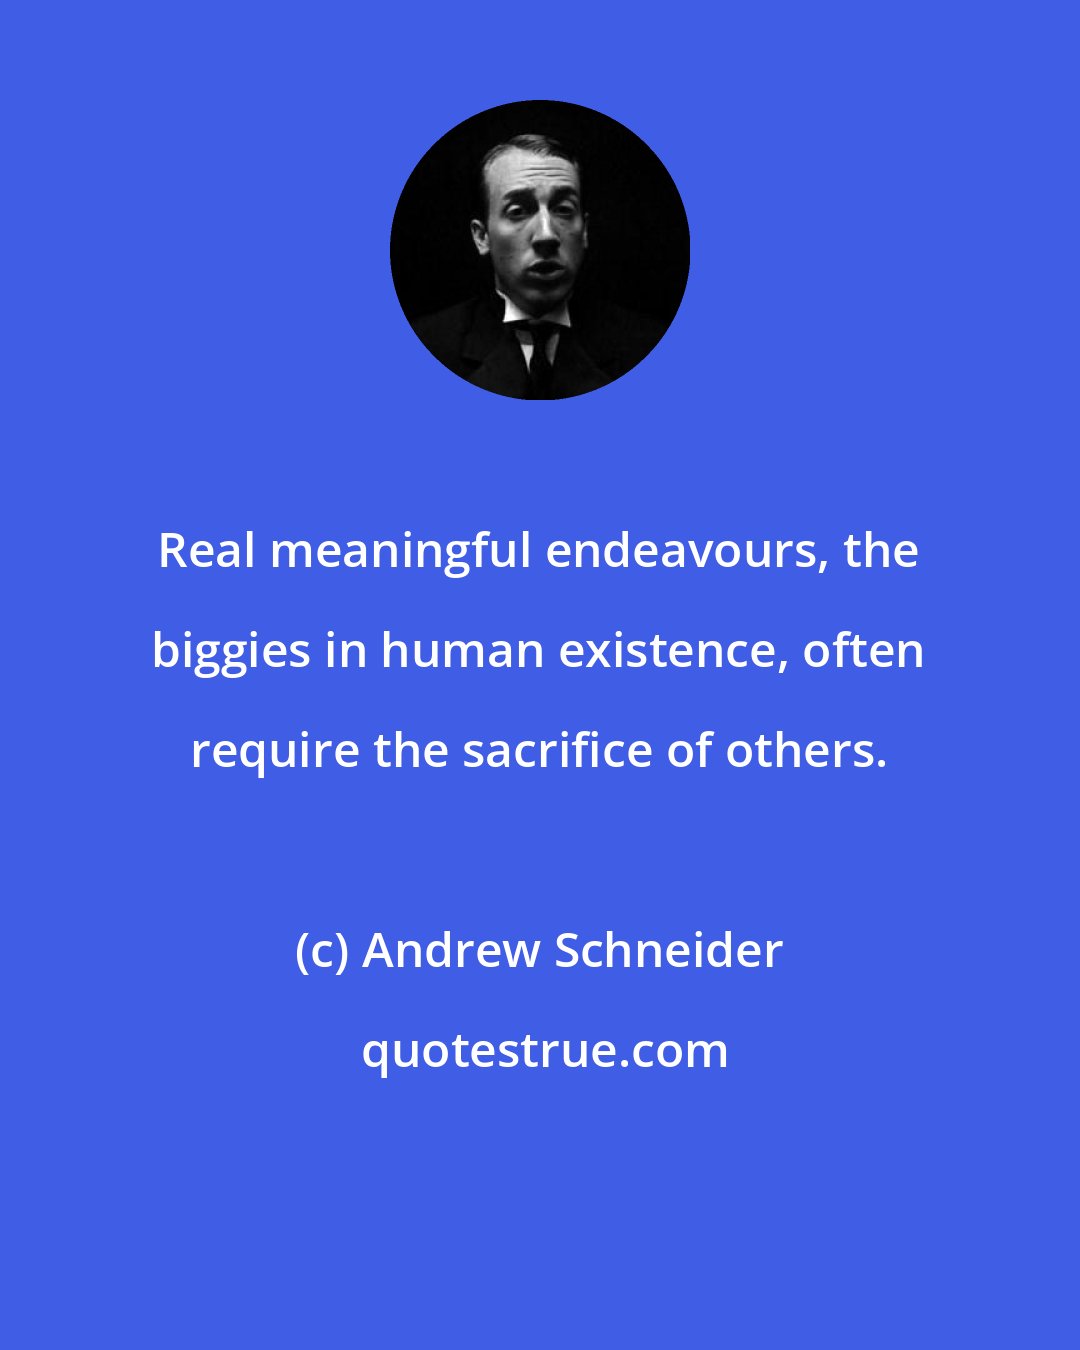 Andrew Schneider: Real meaningful endeavours, the biggies in human existence, often require the sacrifice of others.